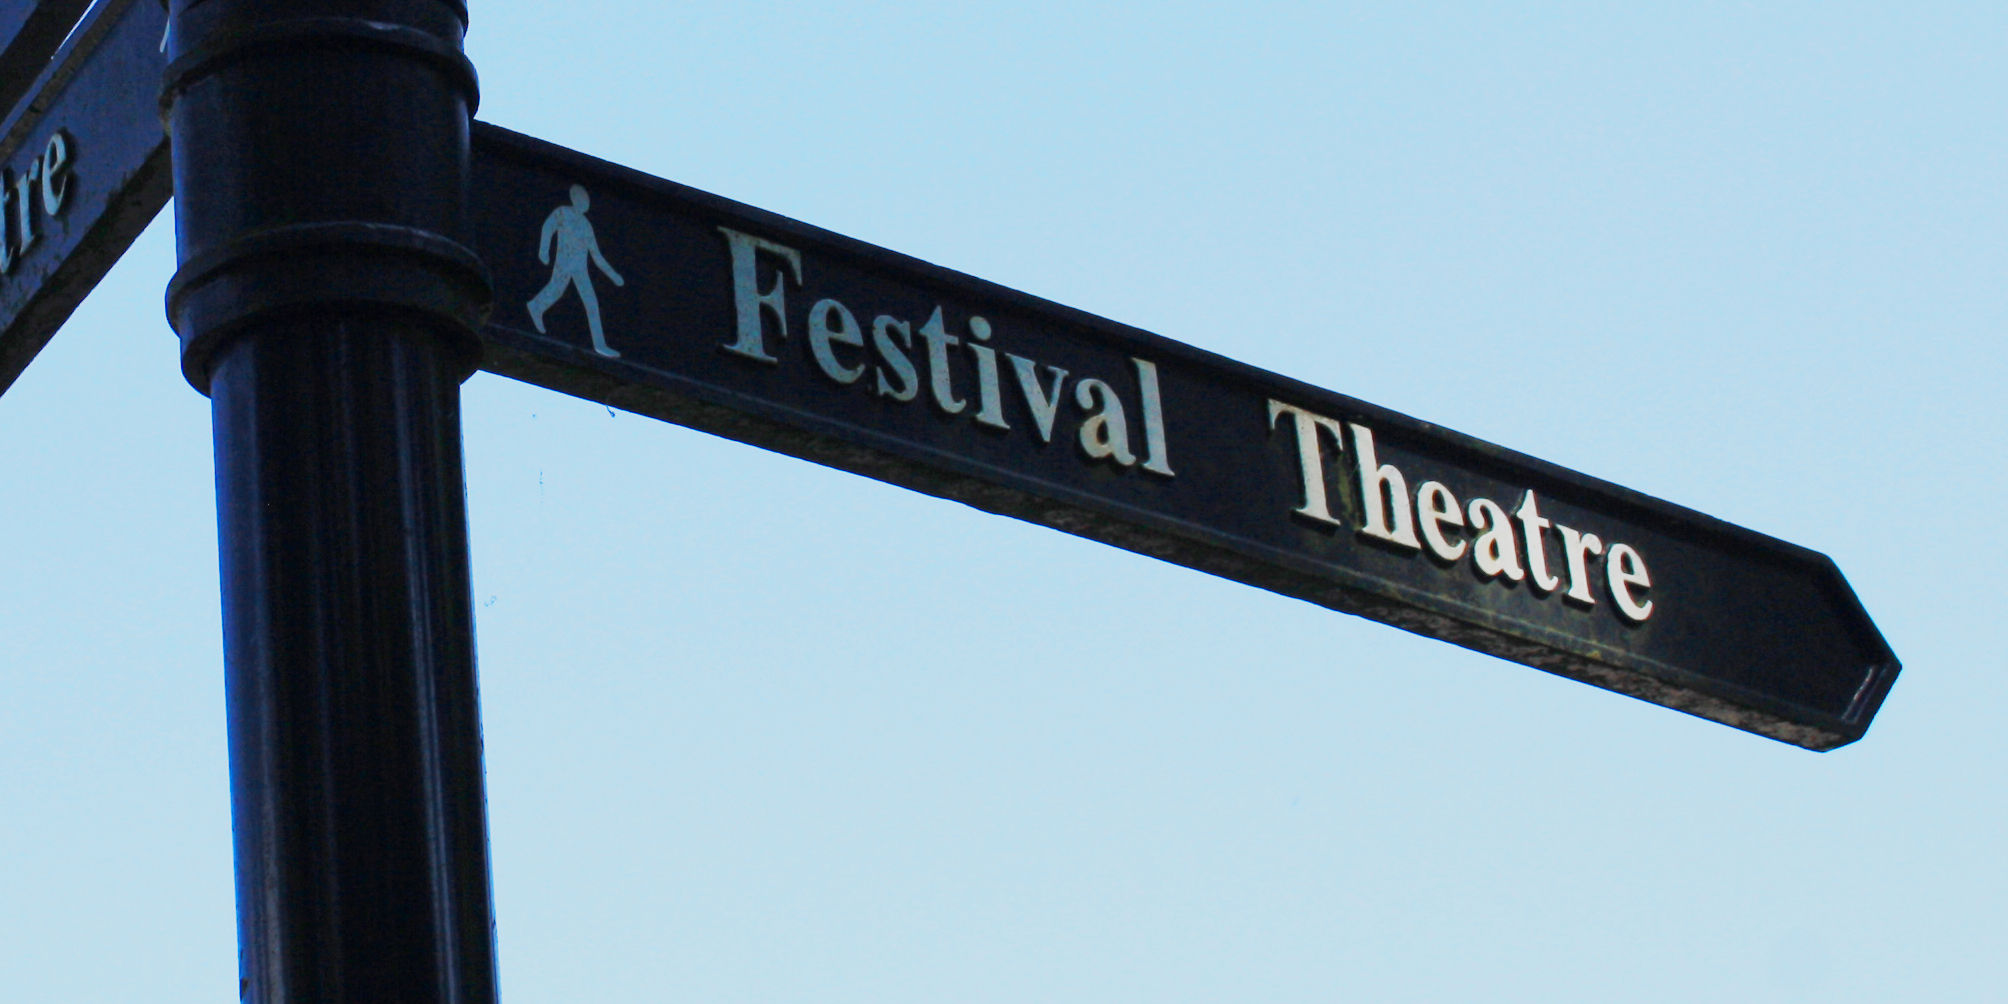 A Black sign post that points in the direction towards Pitlochry Festival Theatre in White writing, there is also an image of a person walking on the left hand side of the words.